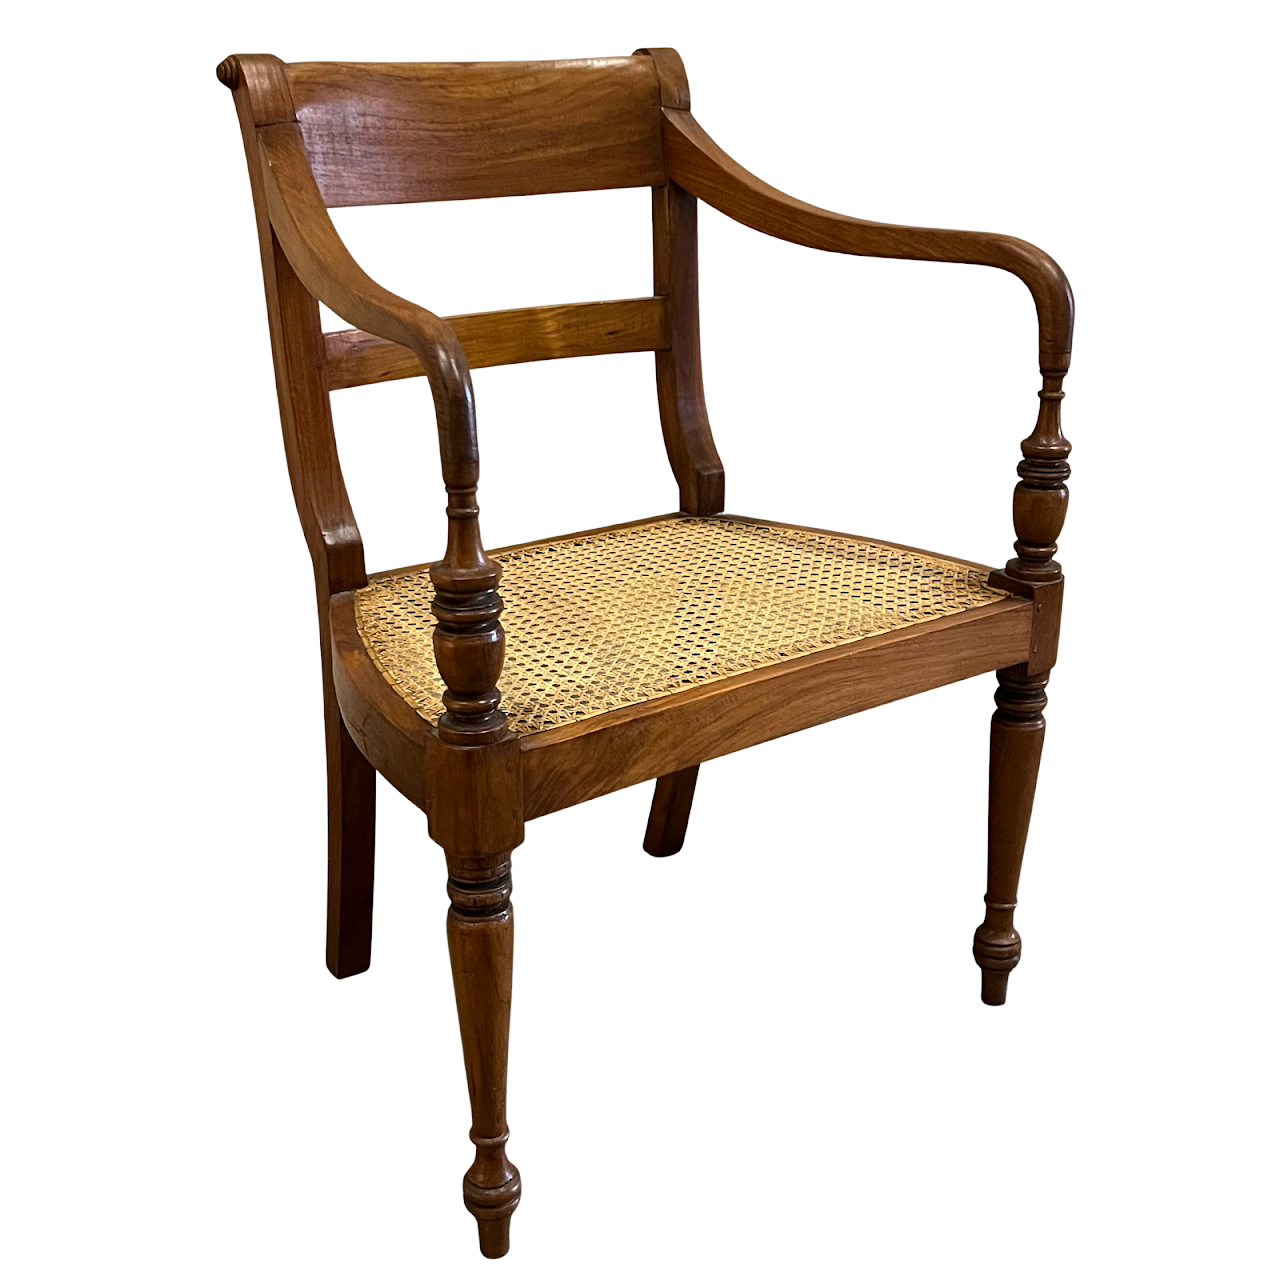 British Colonial Style Armchair